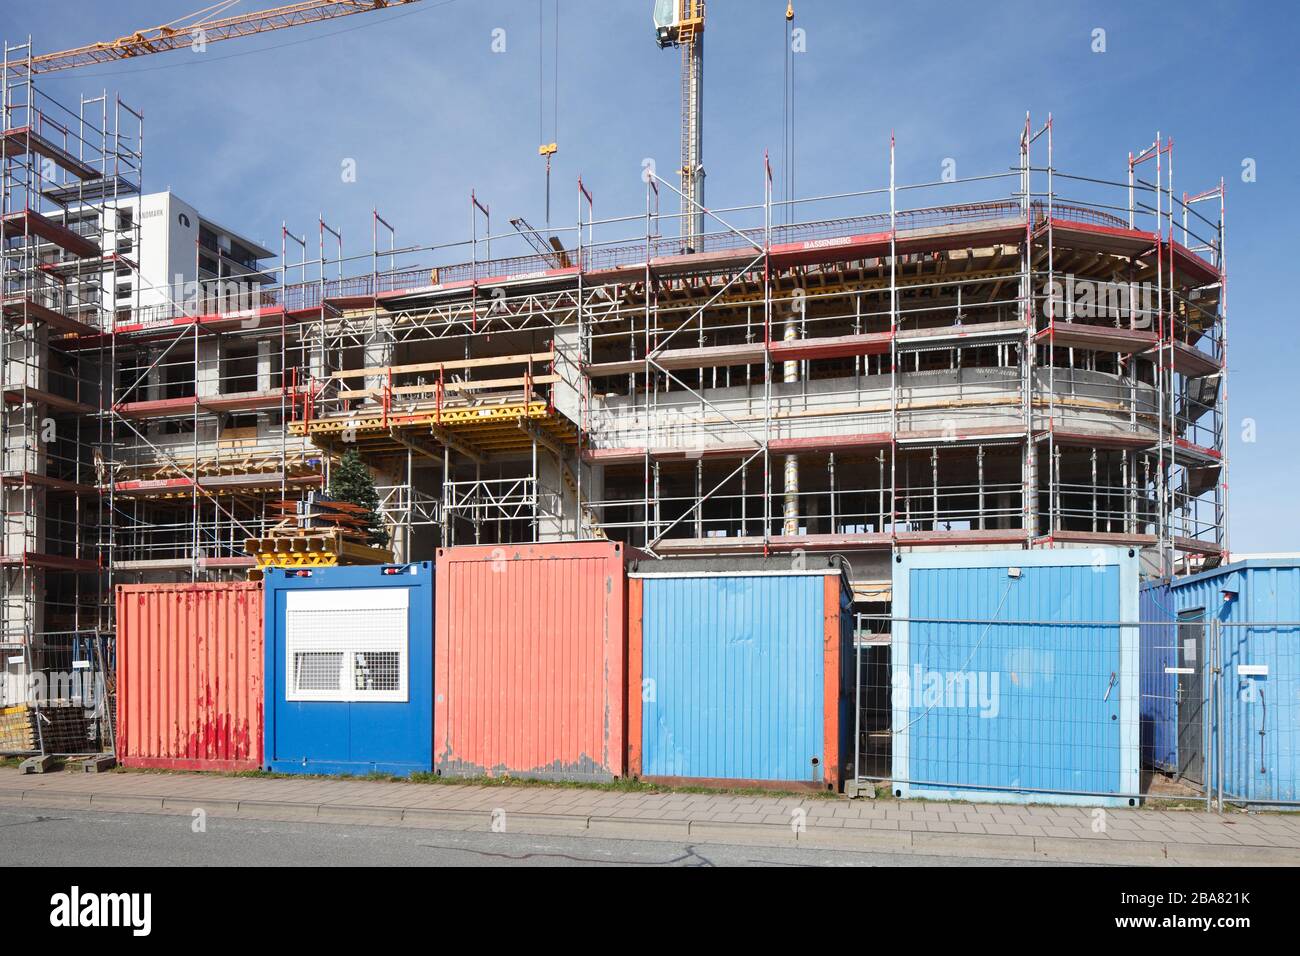 Residential building, scaffolding, construction site, structural work, construction container, Bremen, Germany, Europe Stock Photo